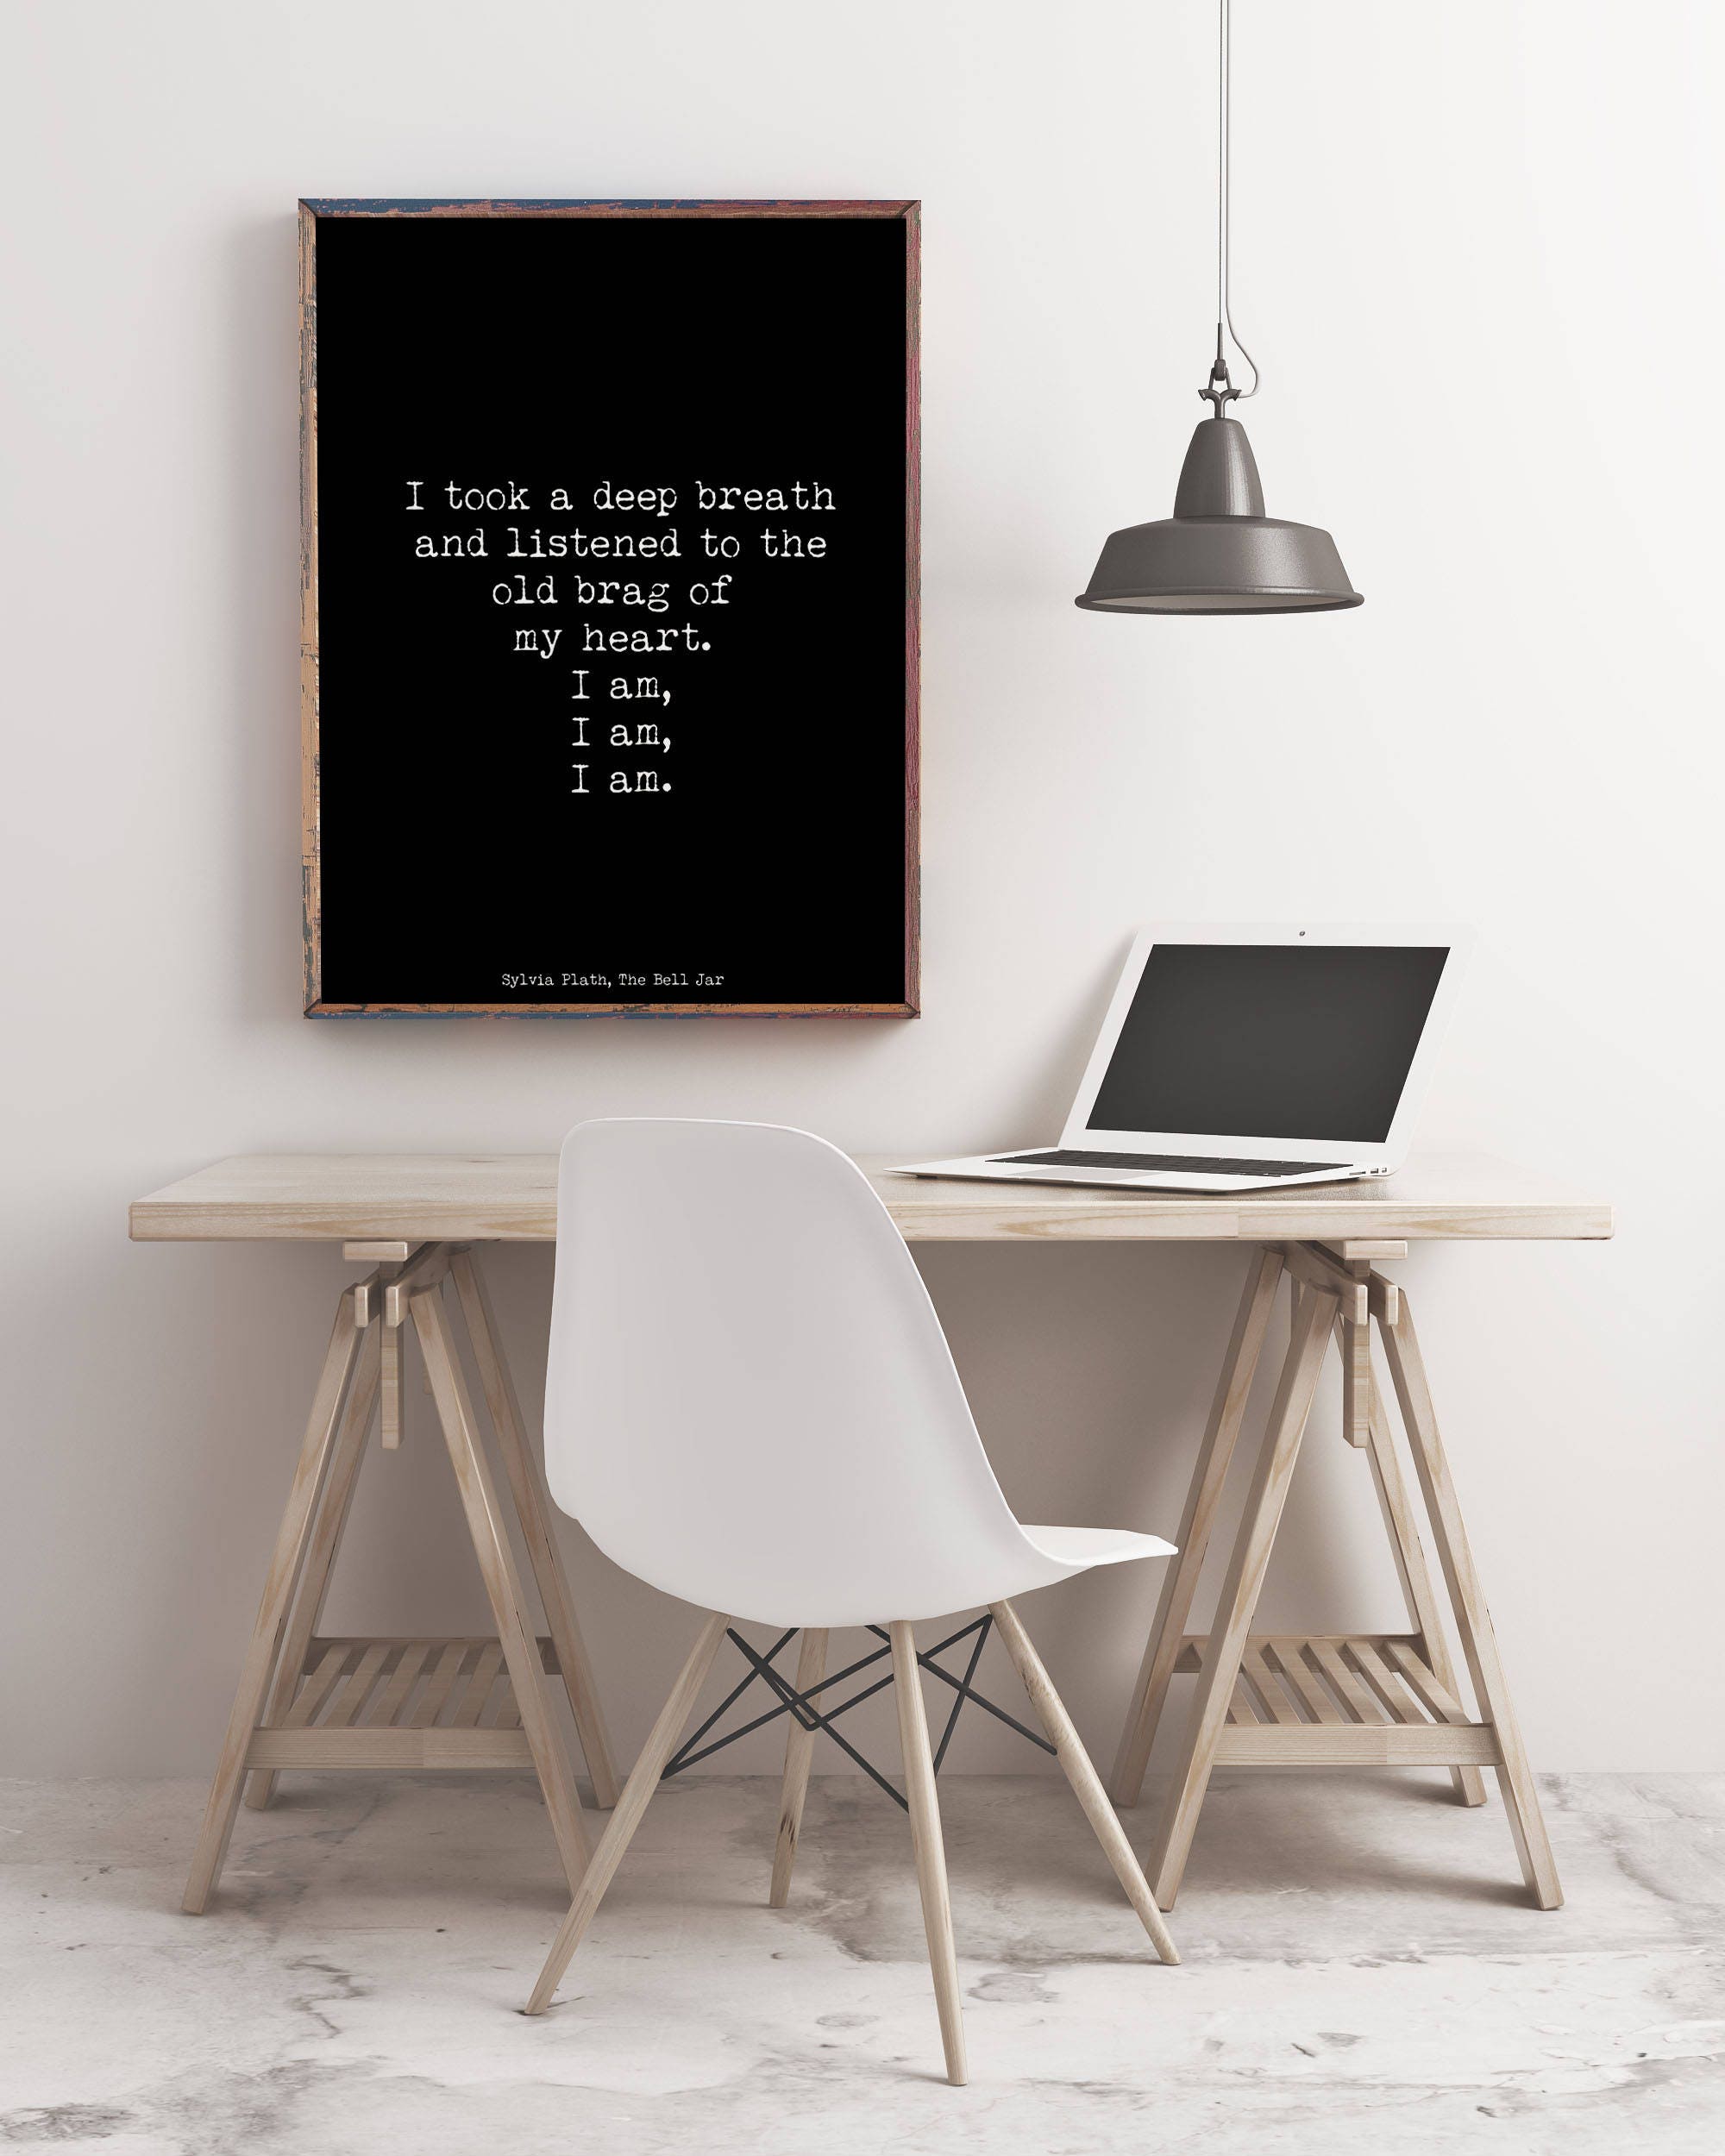 Sylvia Plath Literary Quote, The Bell Jar Plath quote print